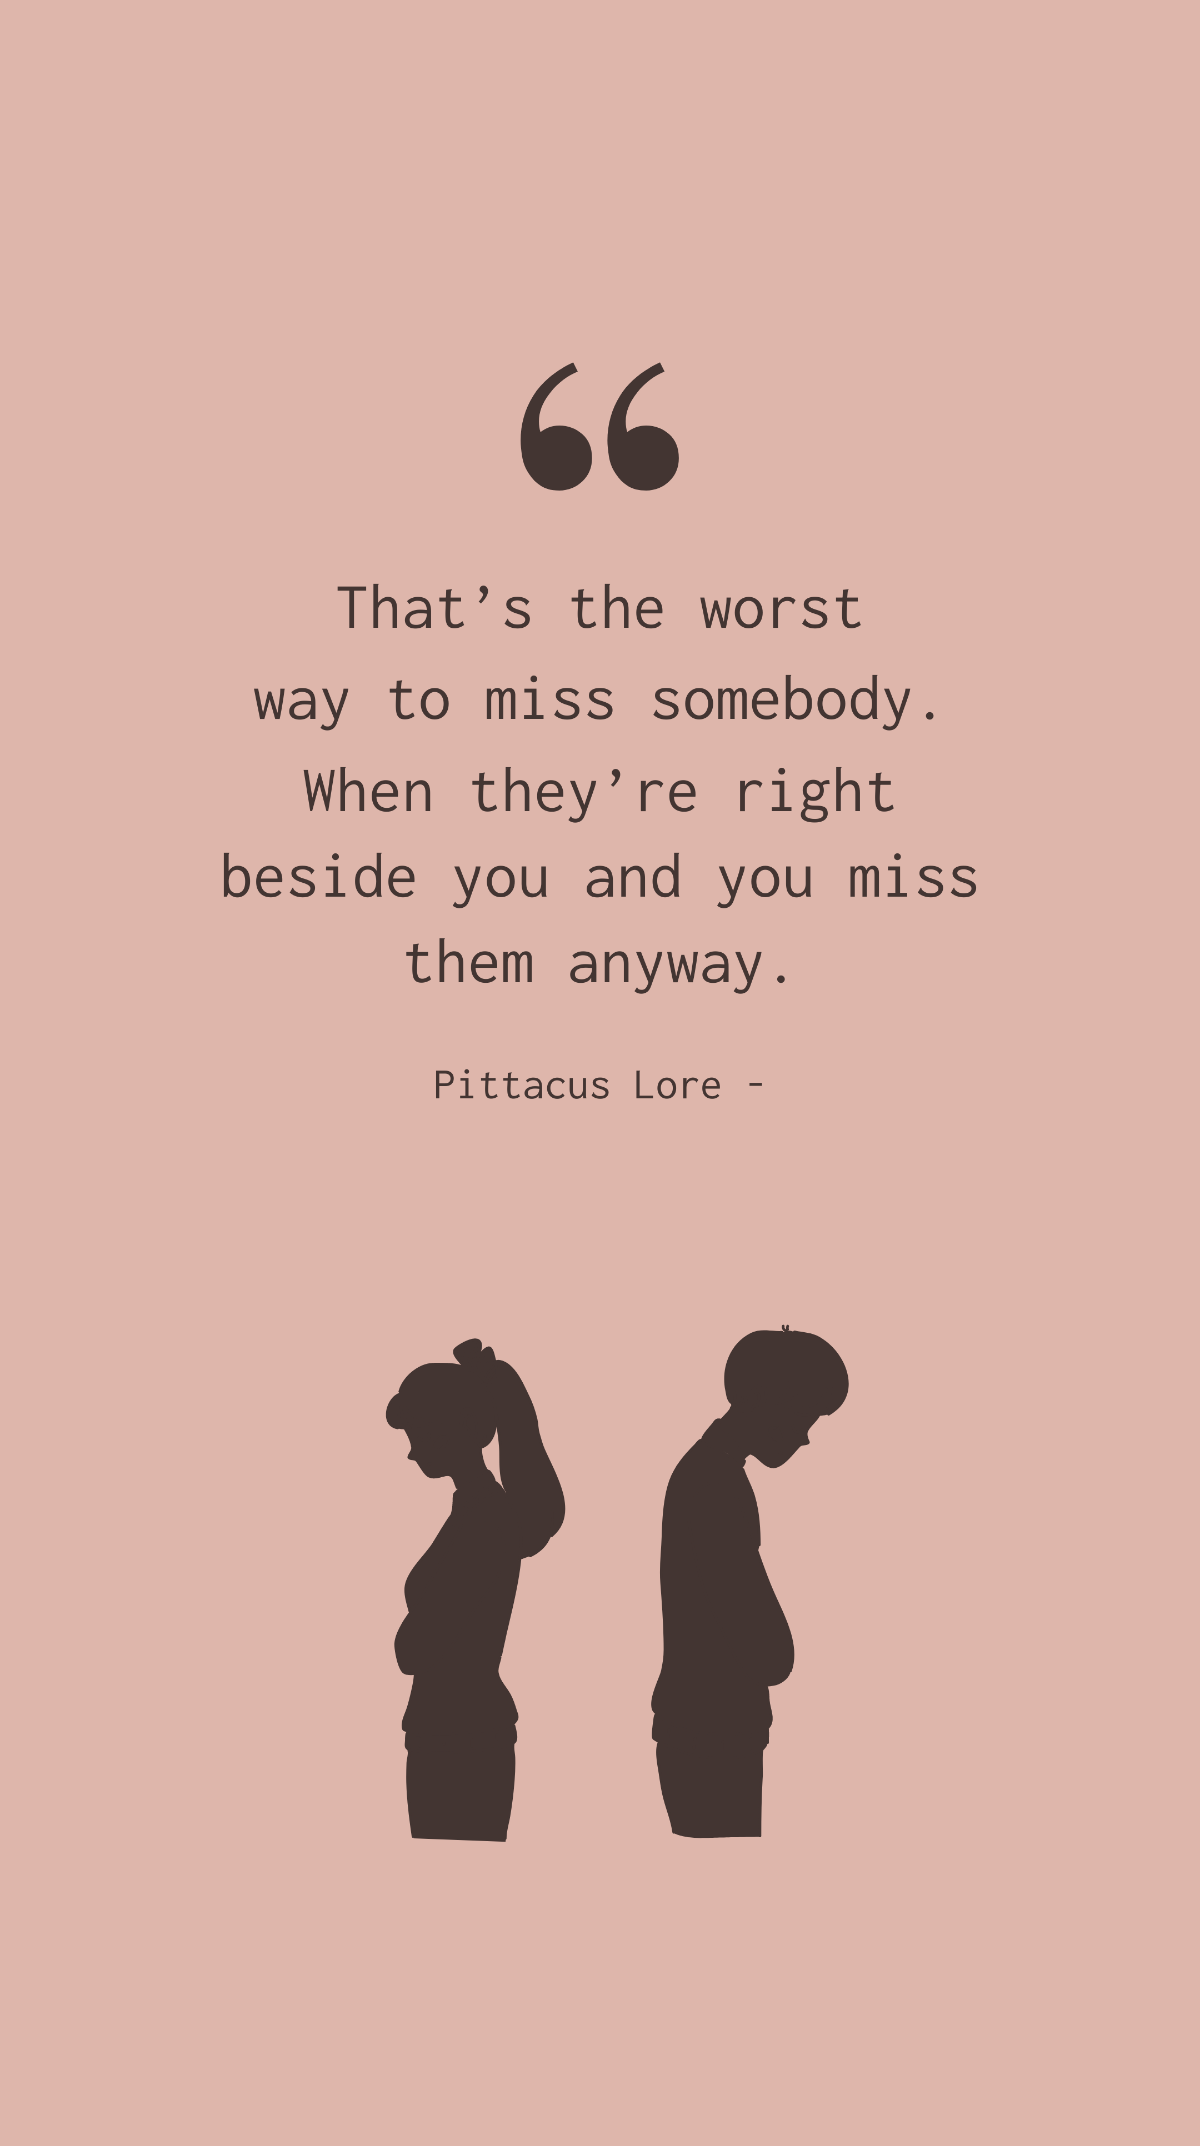 Pittacus Lore - That’s the worst way to miss somebody. When they’re right beside you and you miss them anyway. Template